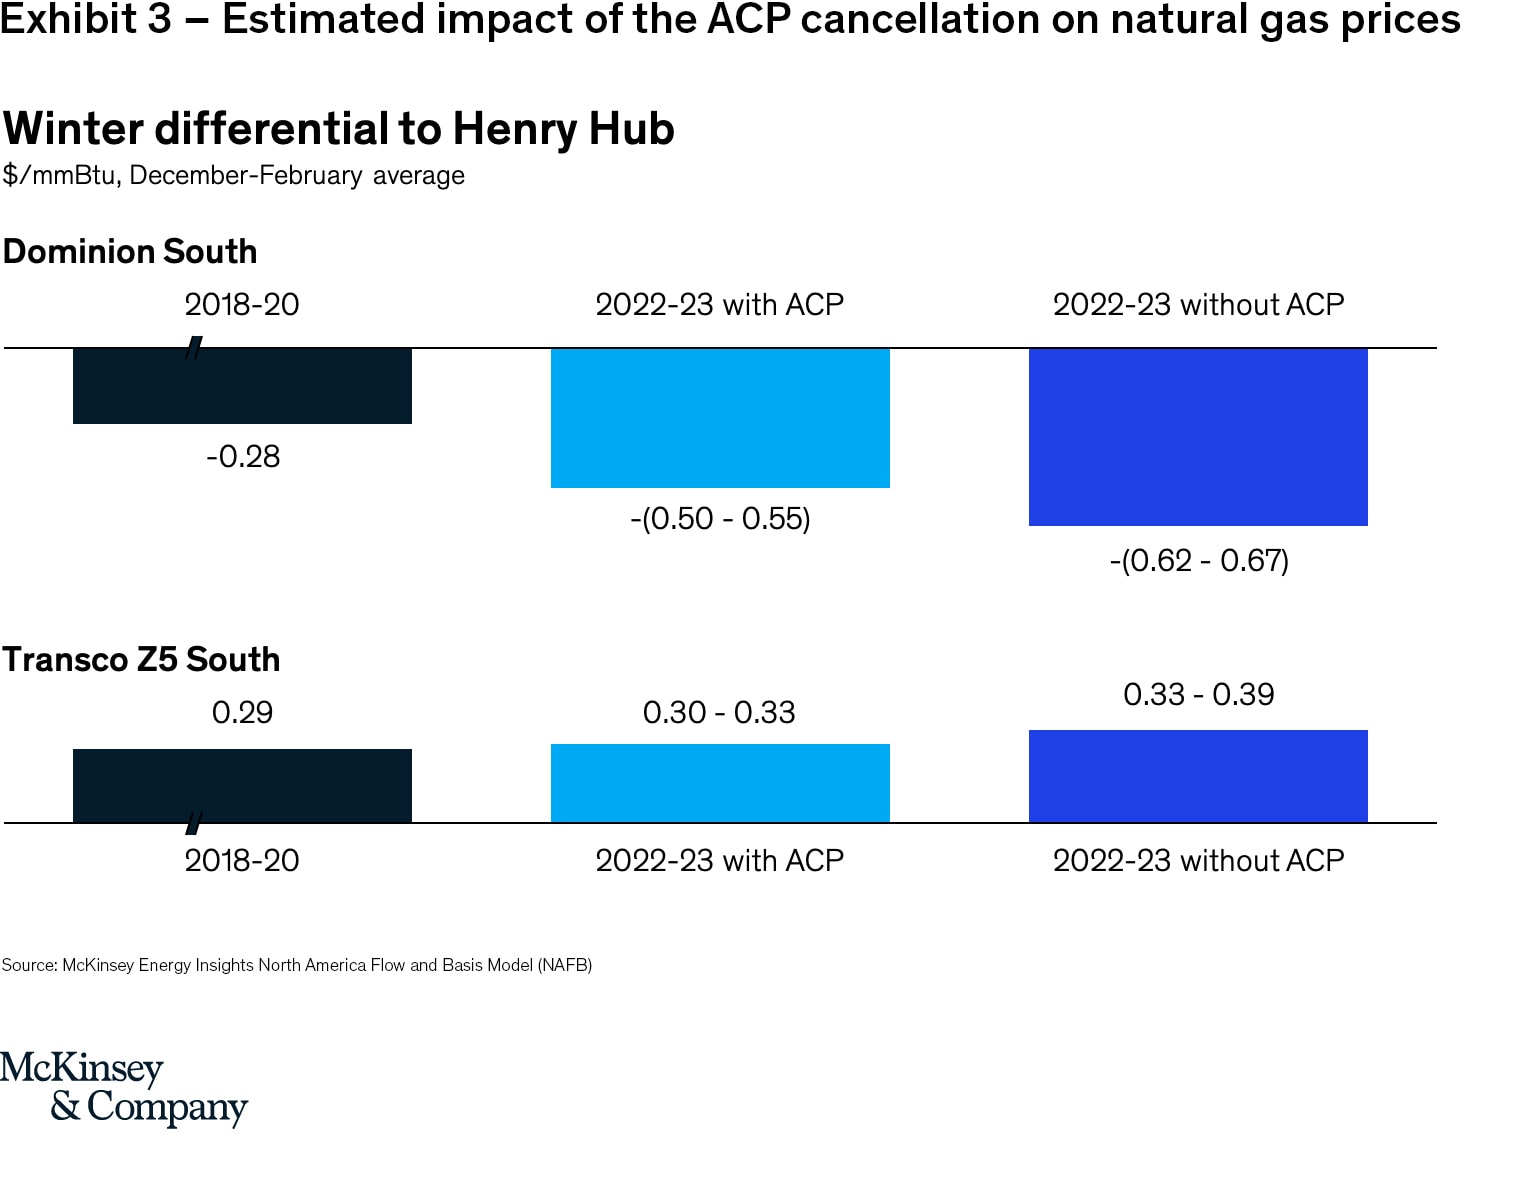 The end of the Atlantic Coast Pipeline: What does it mean for the North American natural gas industry?